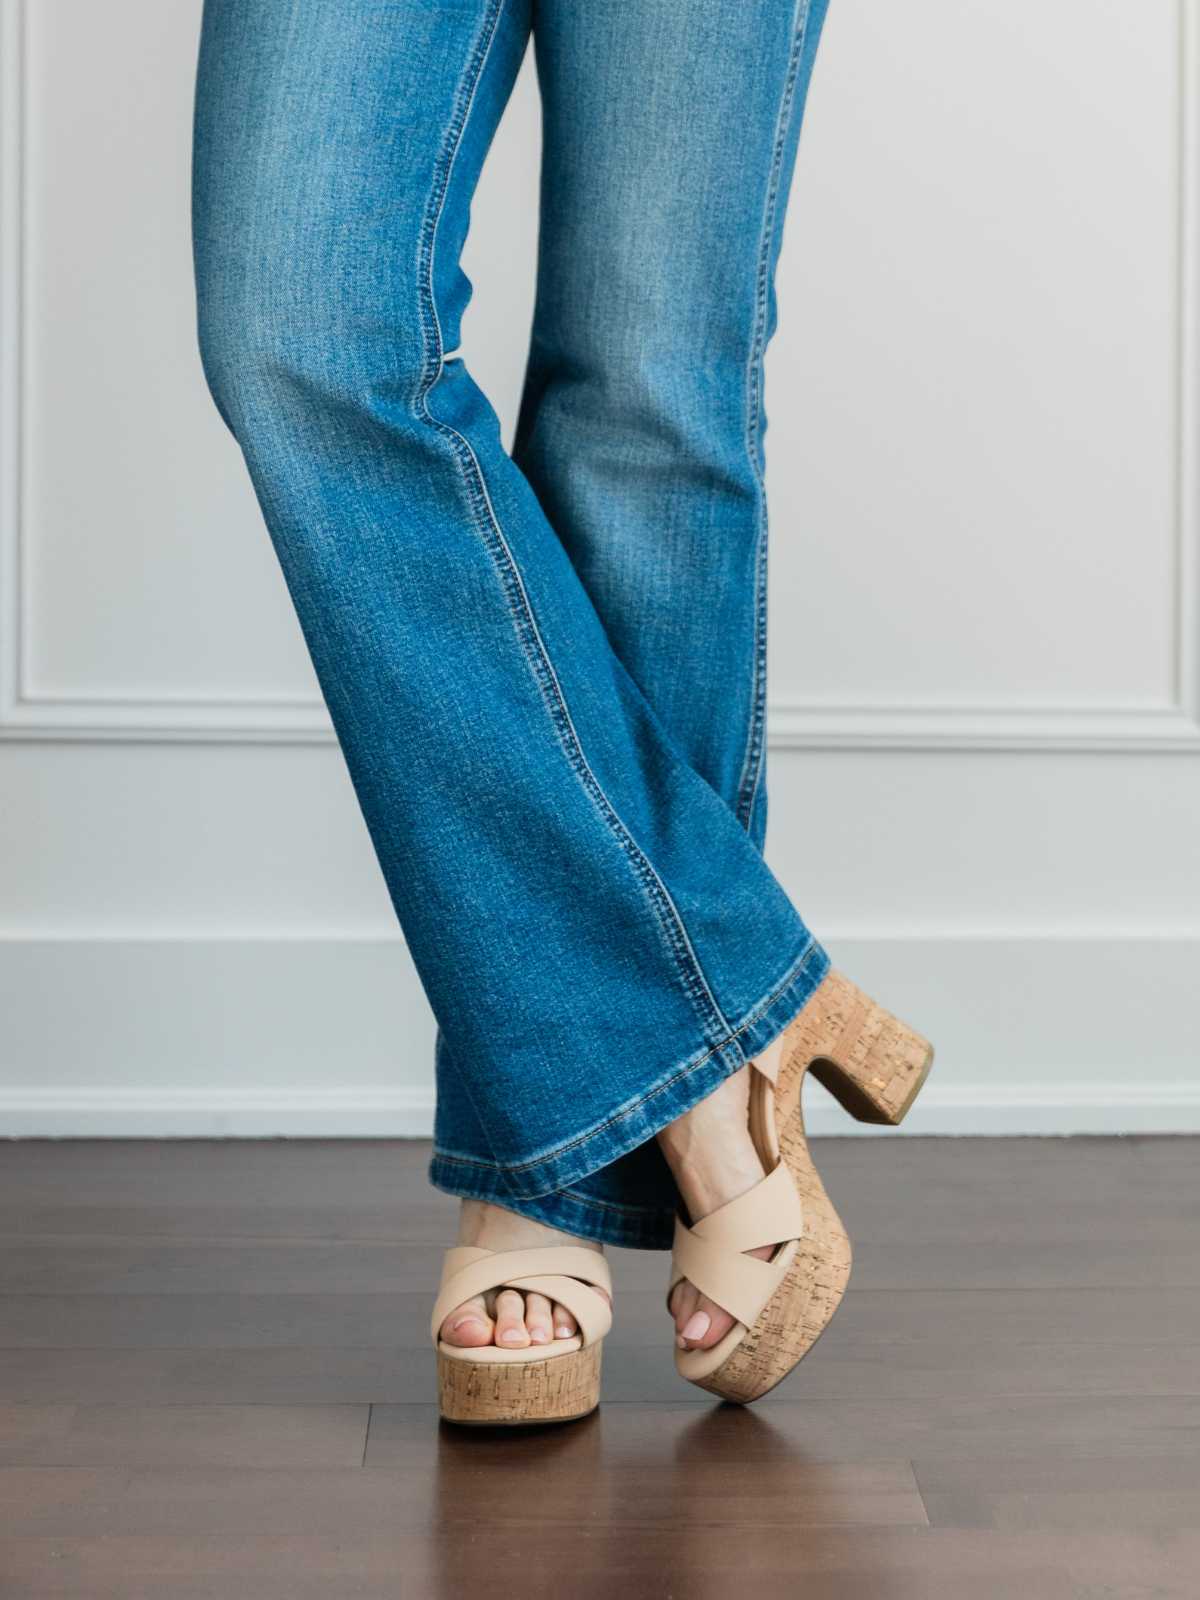 Cropped view of woman's legs wearing platform sandals with full length blue flare jeans.